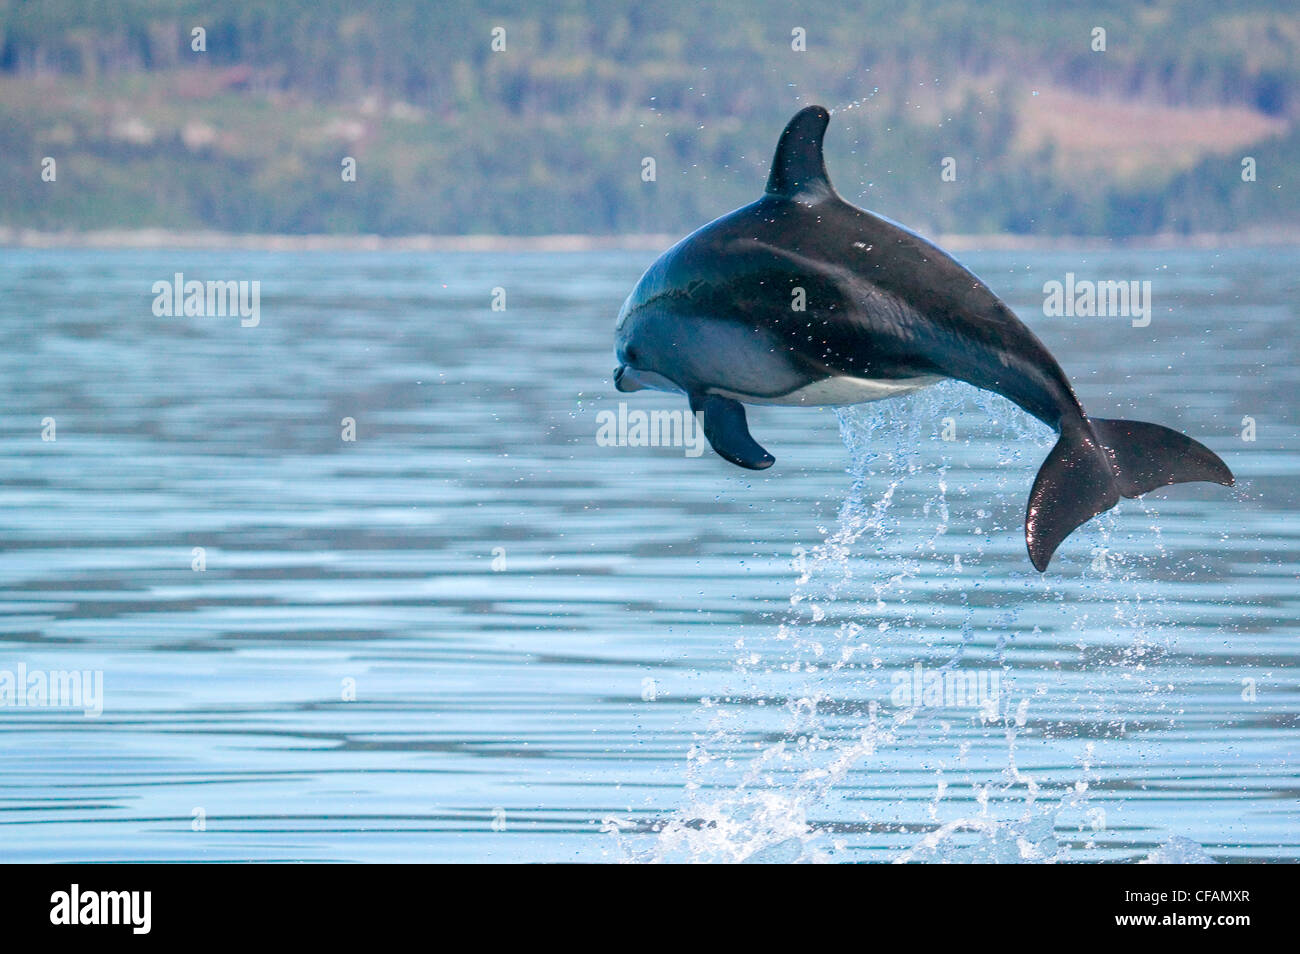 Pacific white-sided dolphin leaping in mid-air, Port McNeill, British Columbia, Canada Stock Photo